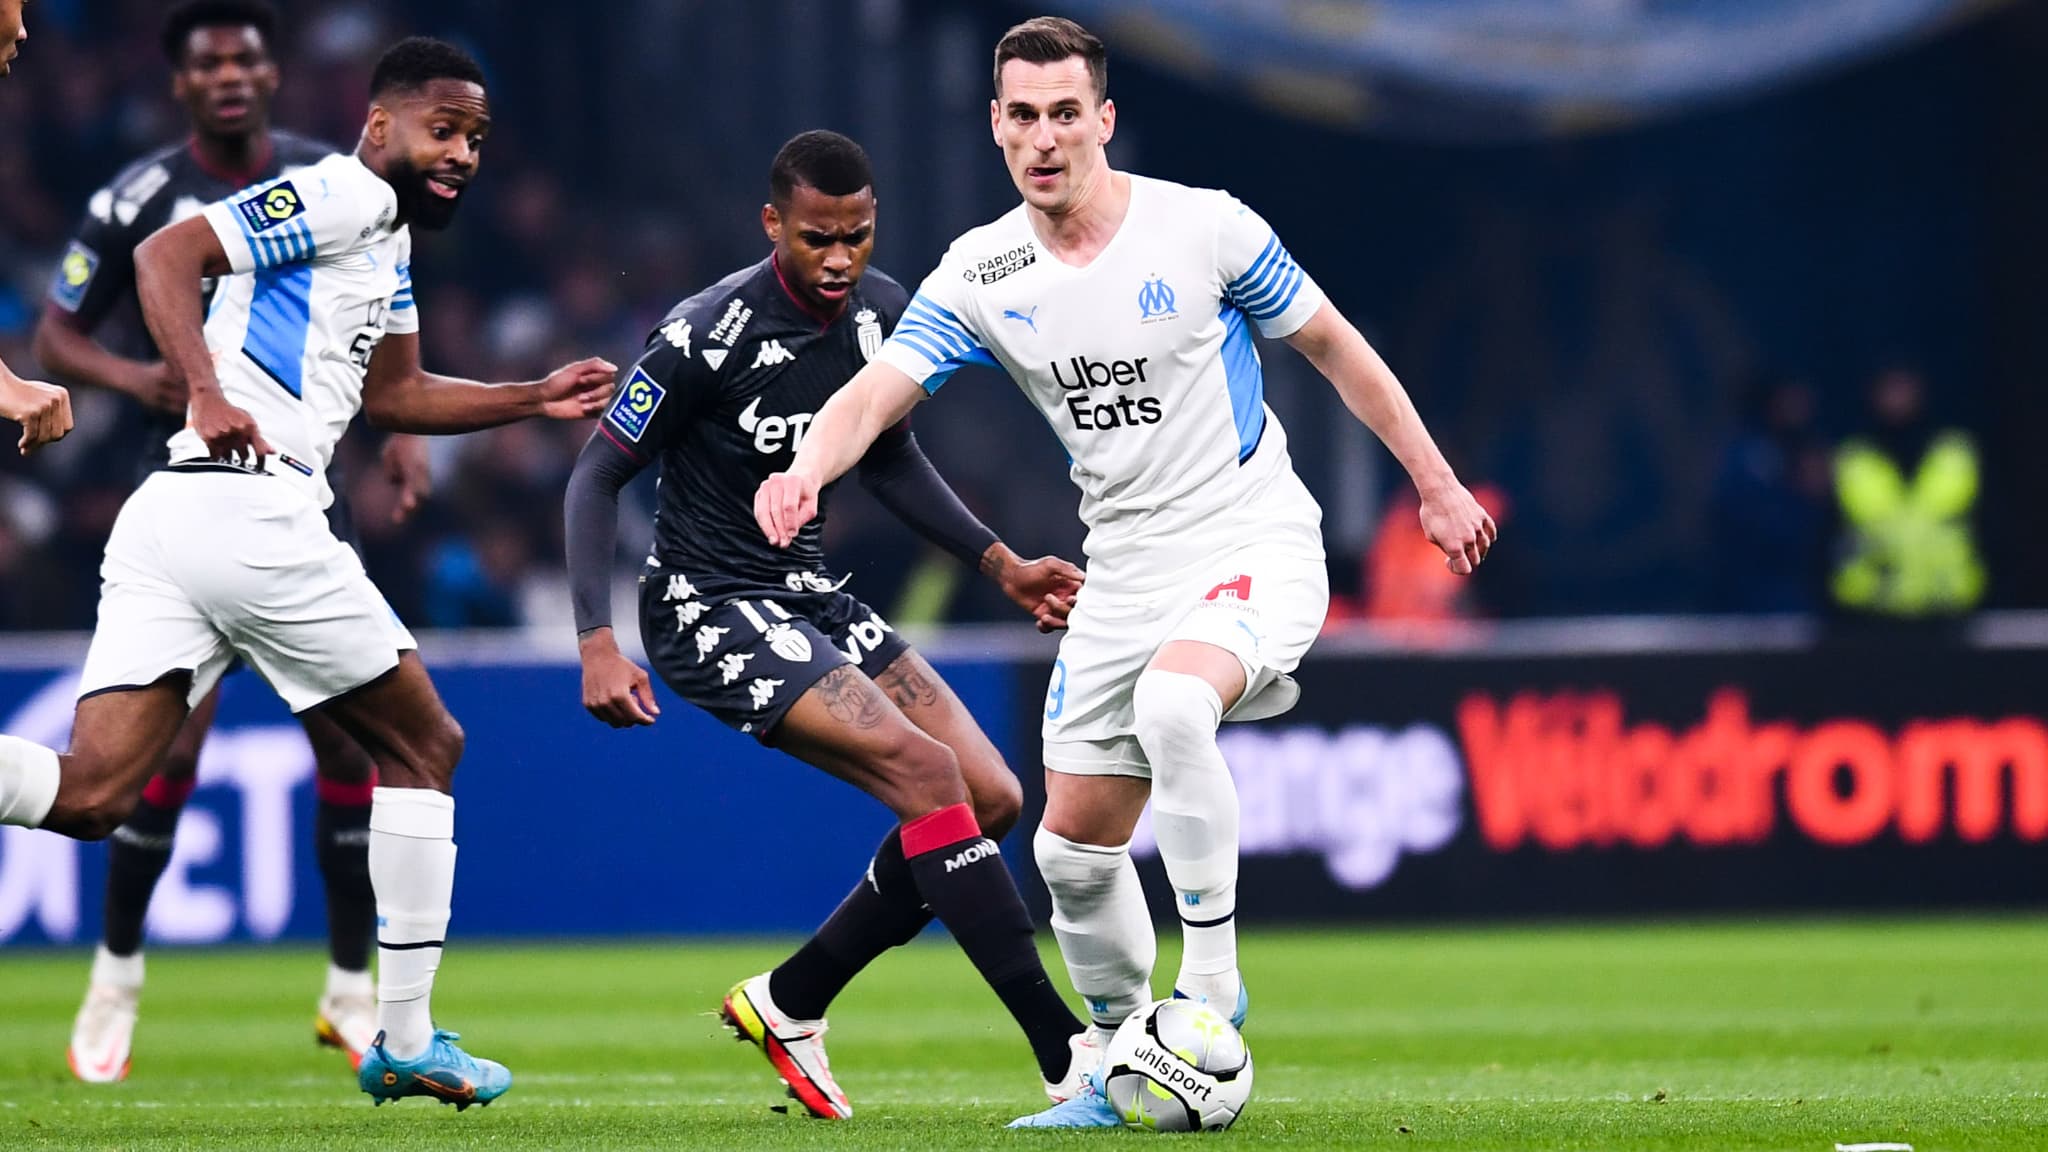 Milik calls for ‘better’ playing time after Monaco loss